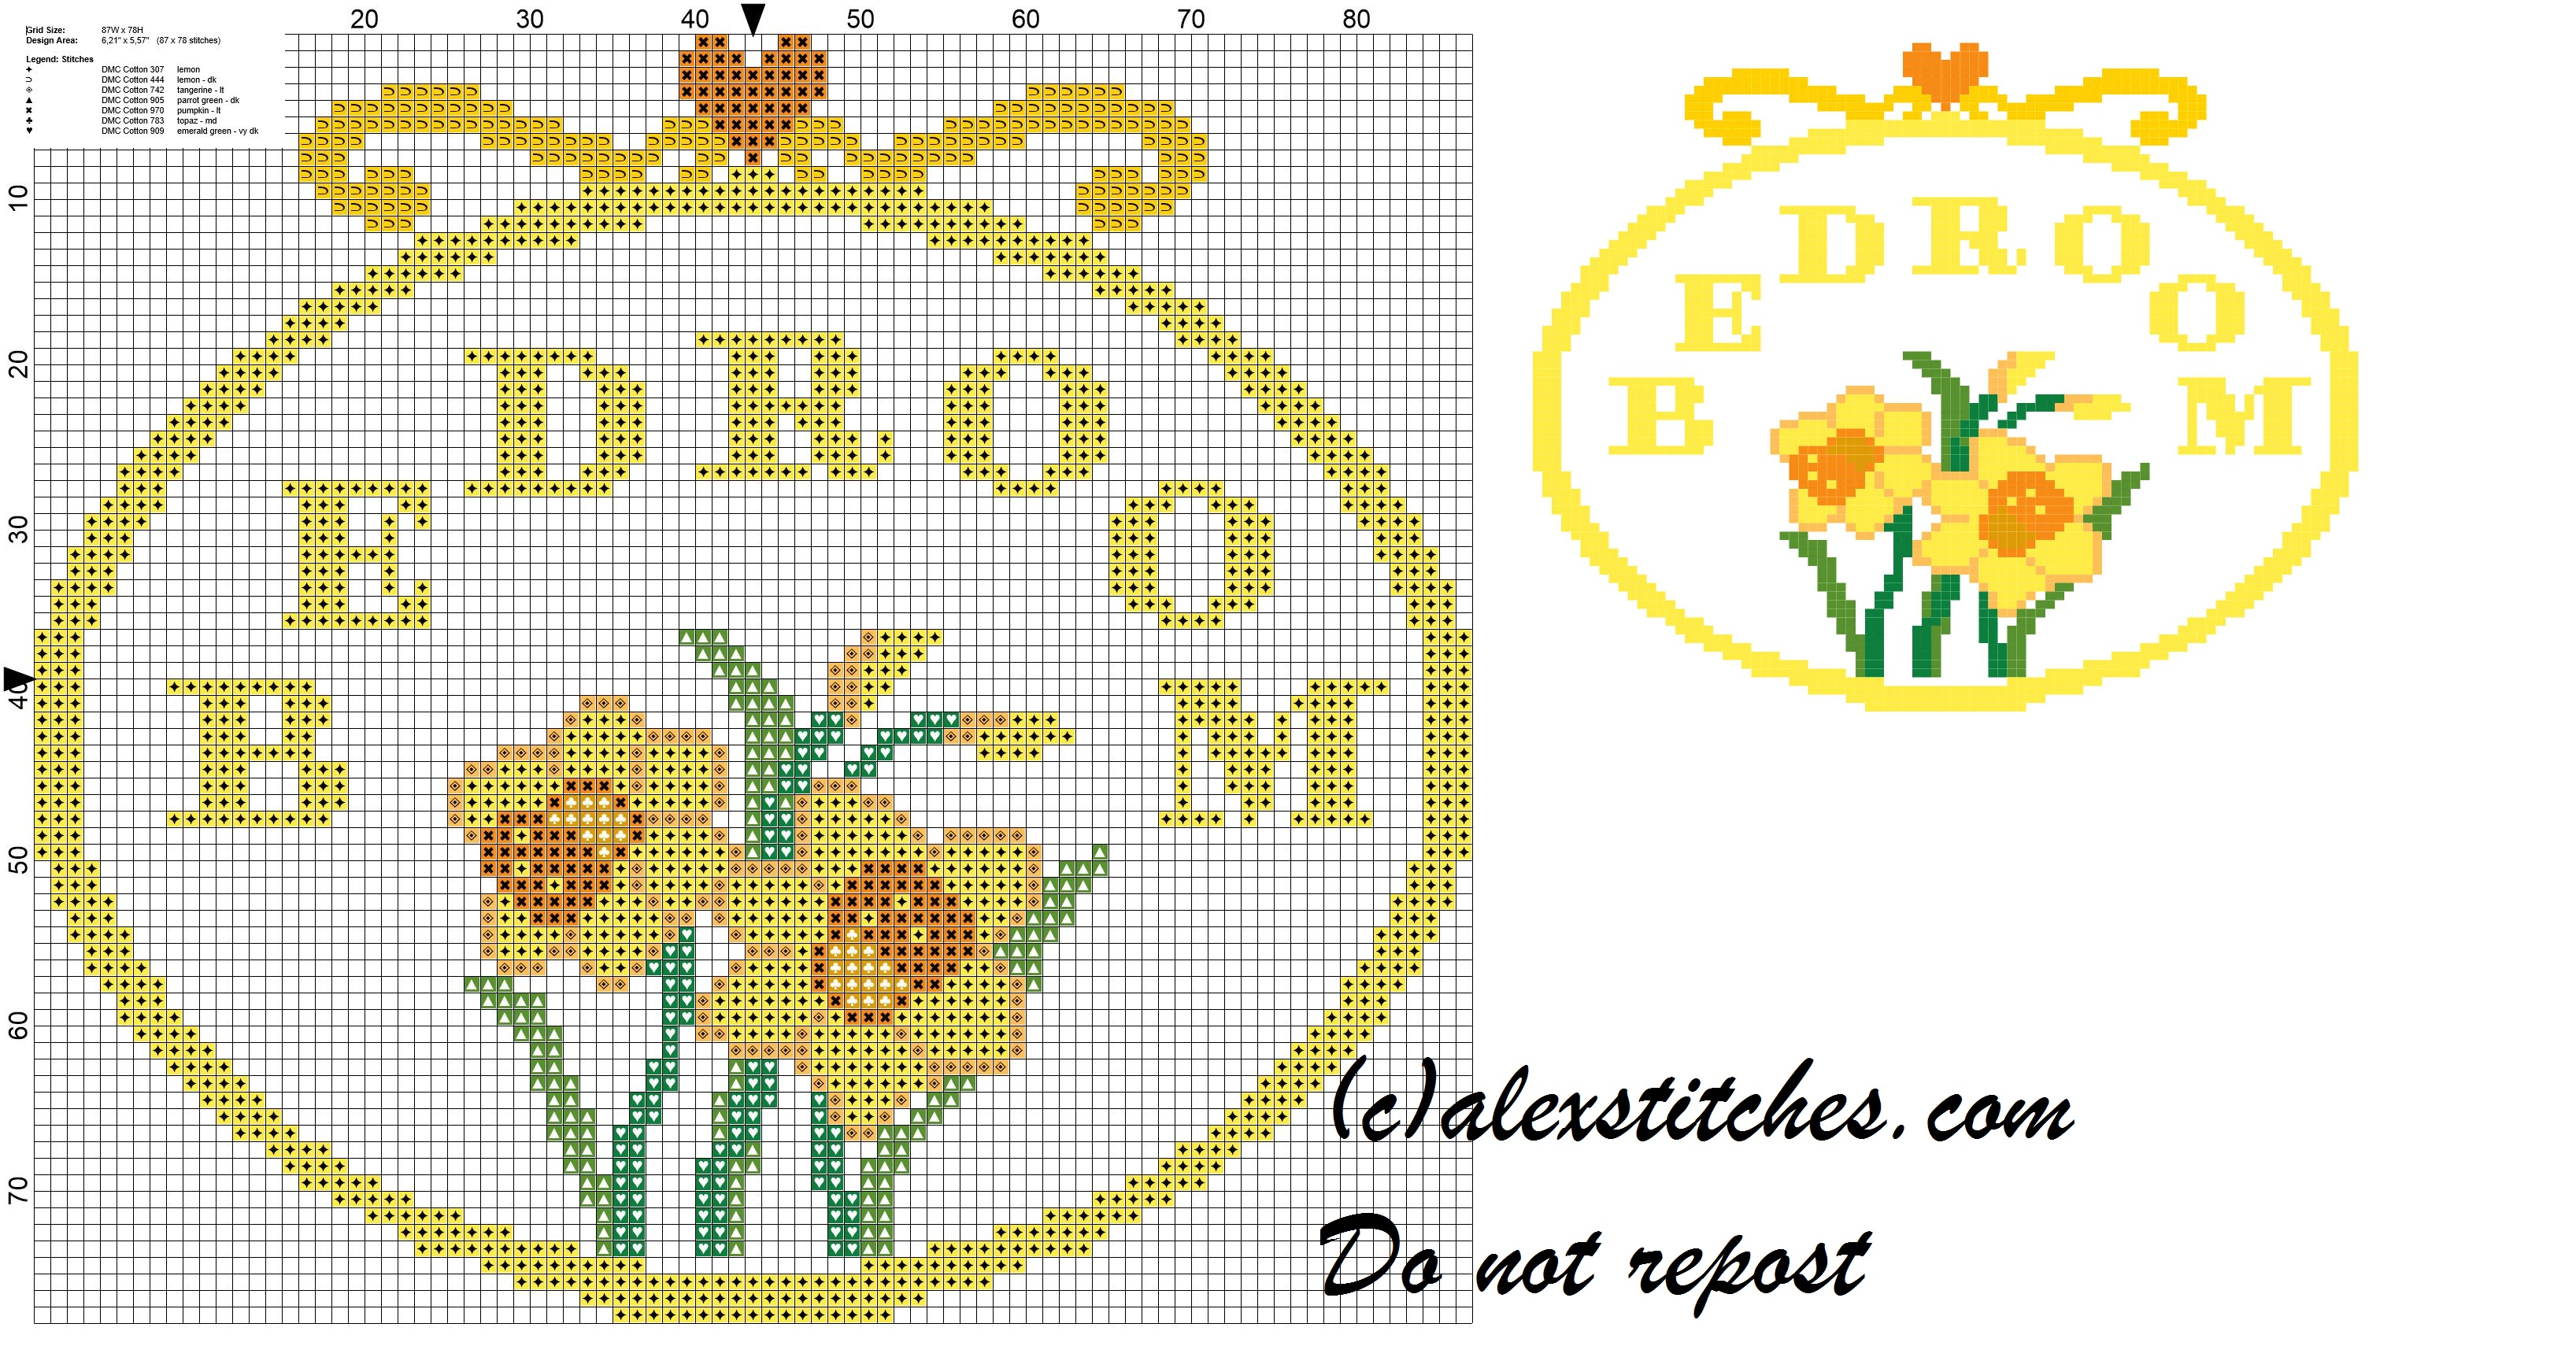 Bedroom with daffodils cross stitch pattern